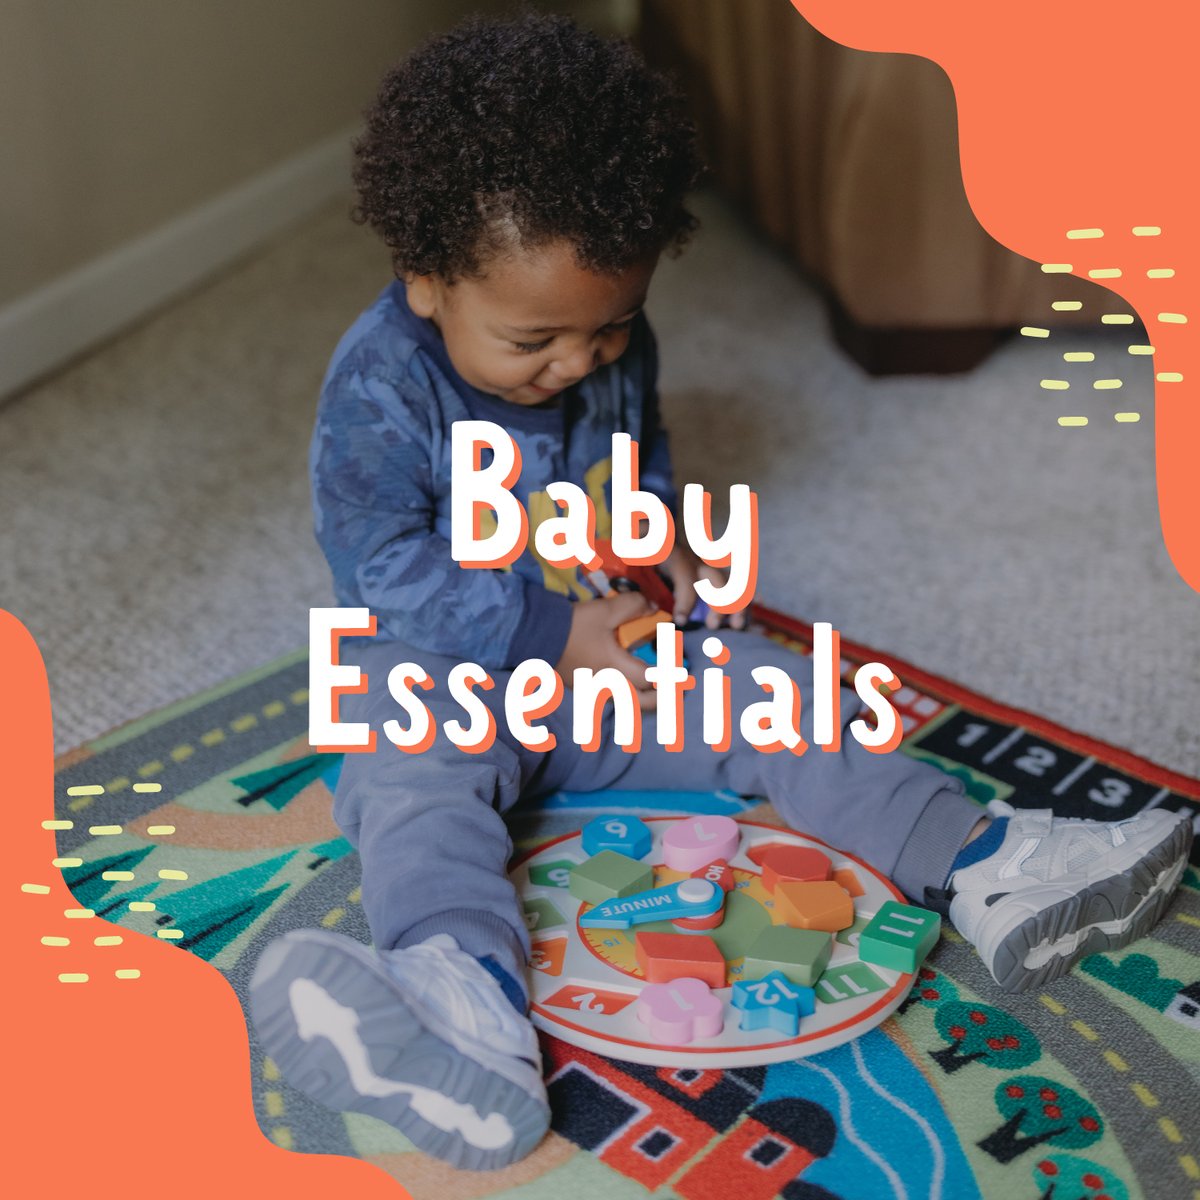 Save on a wide selection of baby essentials at your local #OnceUponAChild! We've got your needs covered with gently used clothing, footwear, toys, bouncers, play centers, strollers and more! #BabyEssentials #ShopForLess